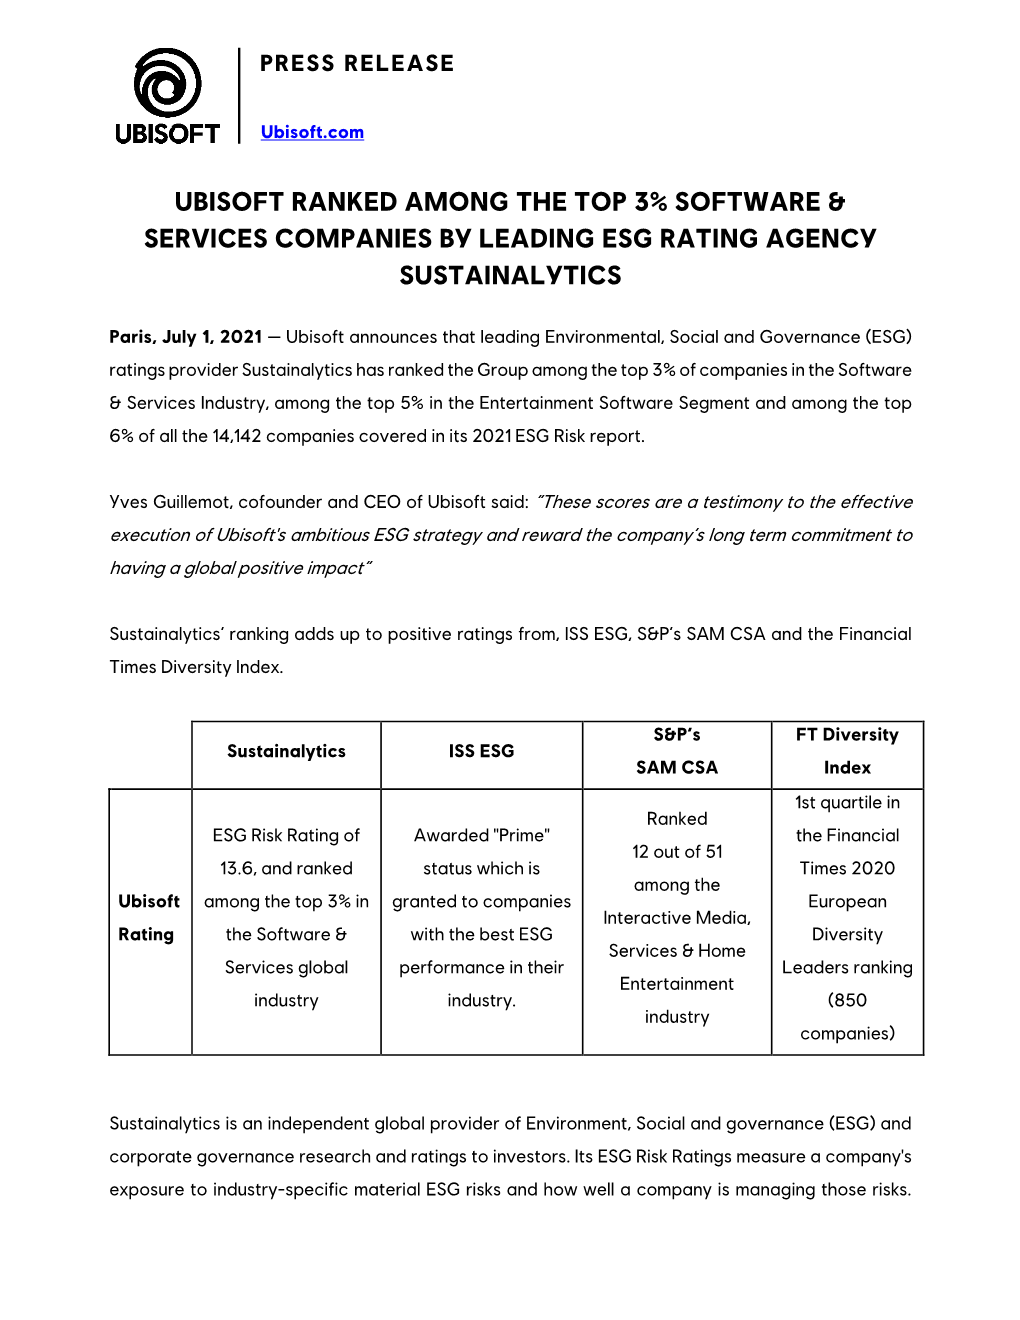 Ubisoft Ranked Among the Top 3% Software & Services Companies By